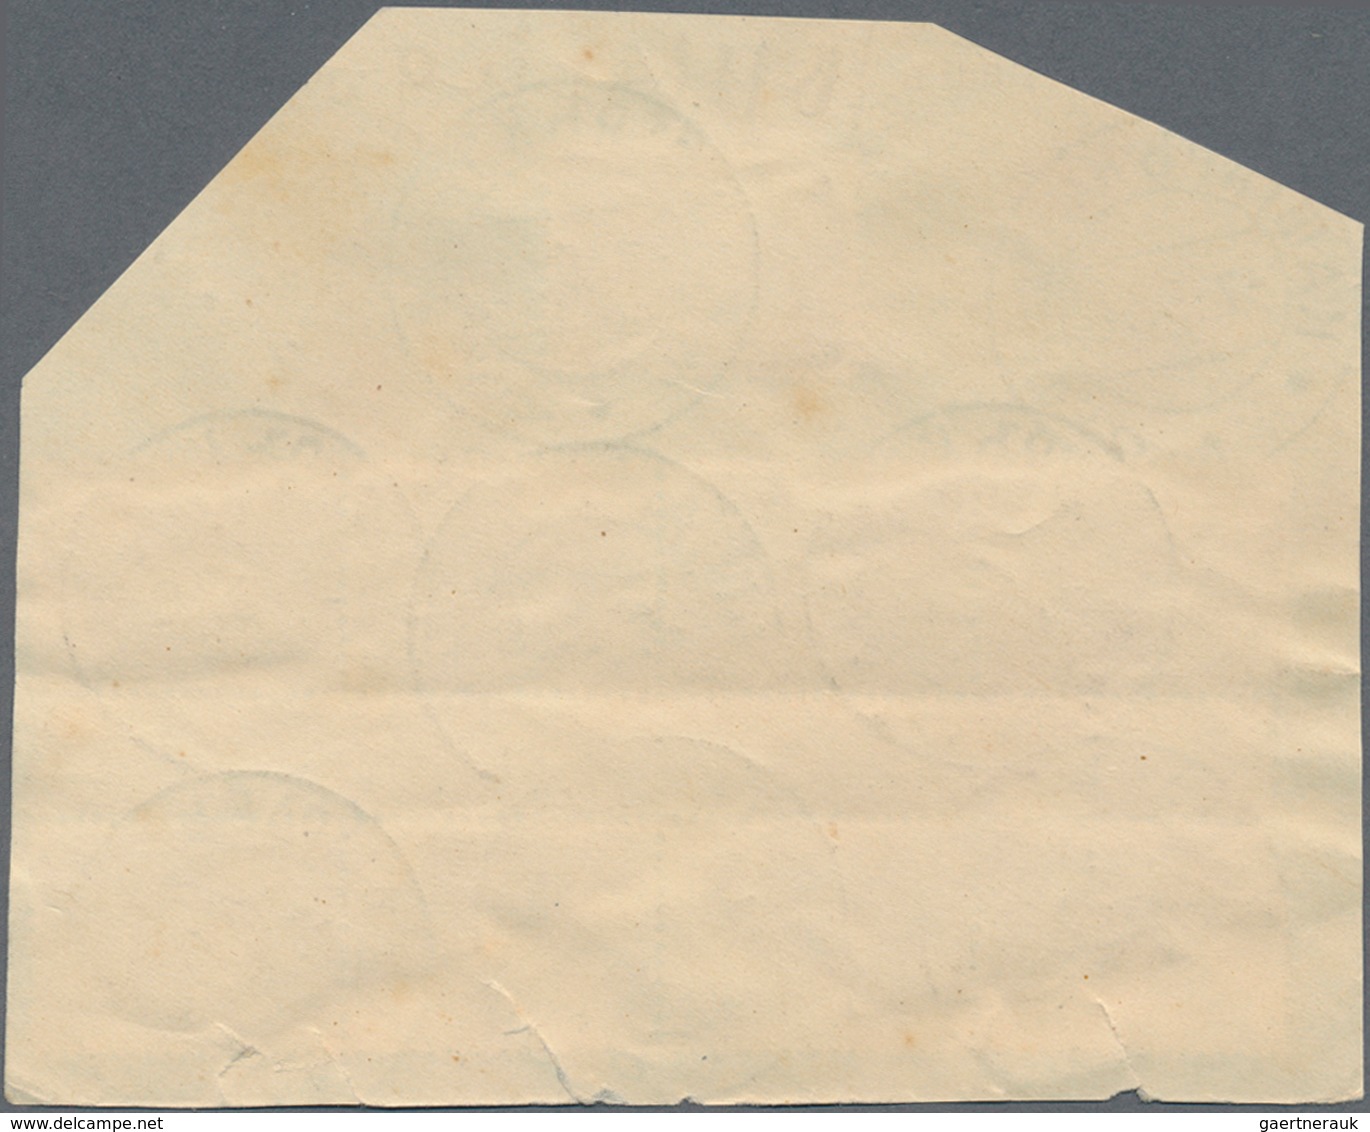 Russische Post In China: 1918 Cut-out From The Backside Of A Letter Franked With 9x 70 Cop. Brown Co - China